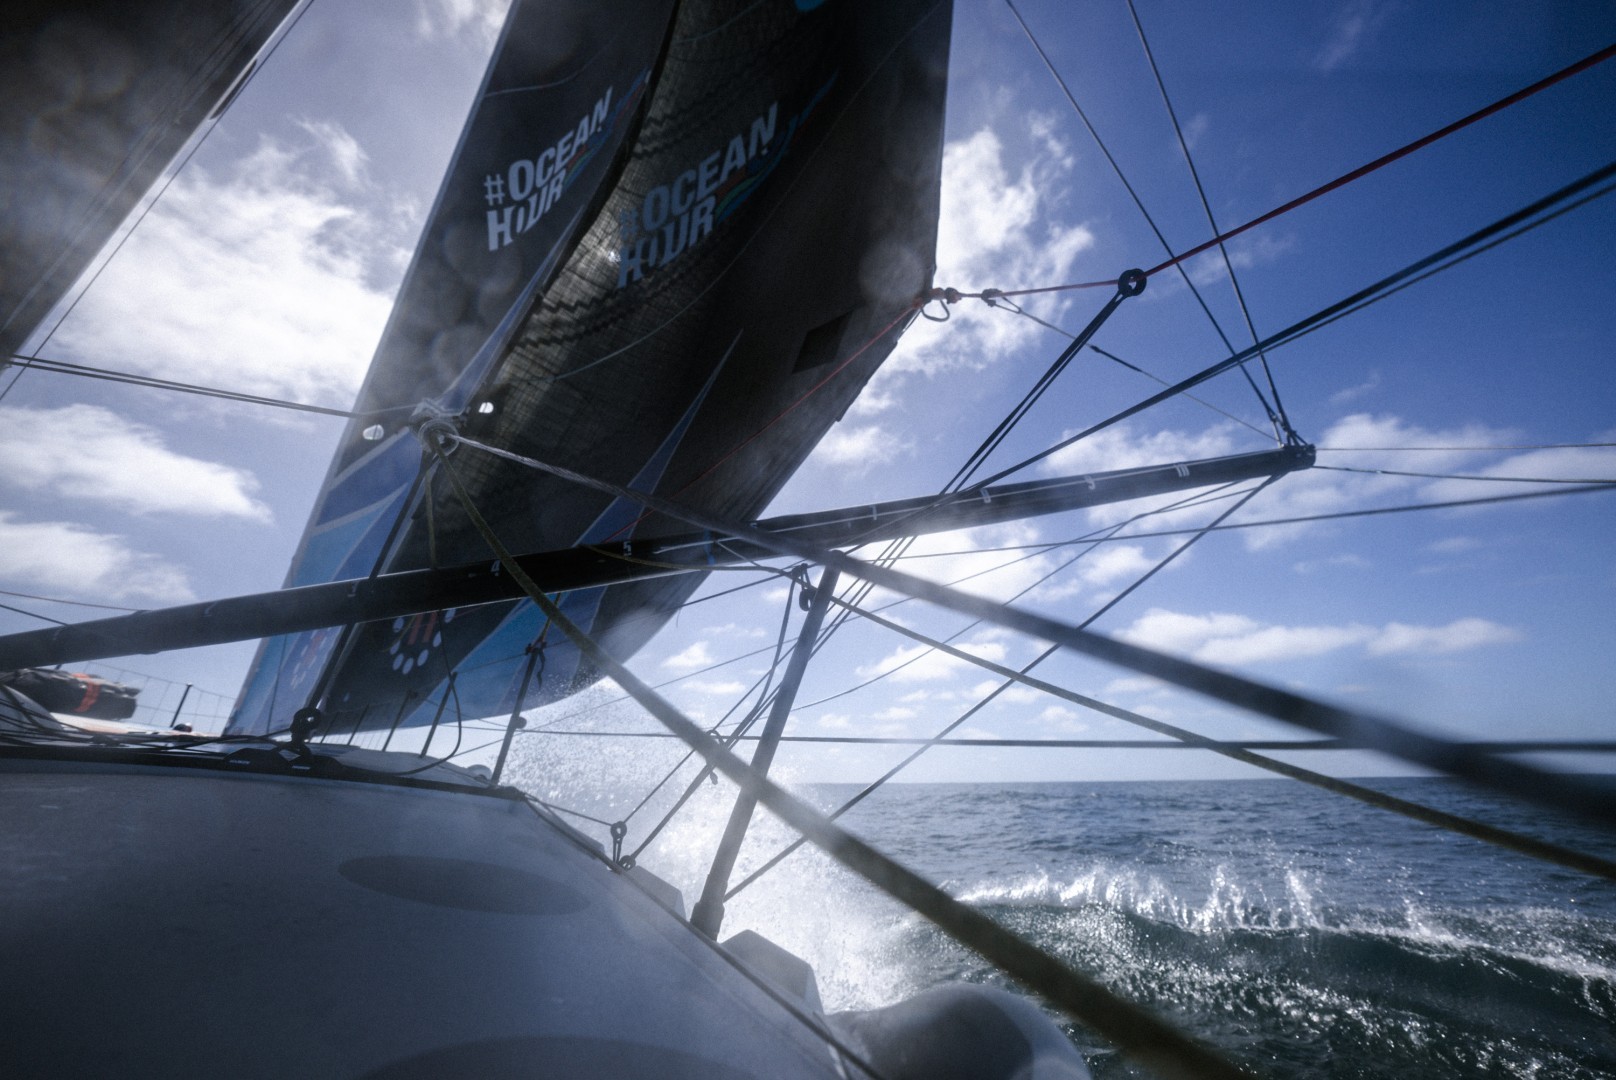 On board 11th Hour Racing Team in moderate conditions during Leg 2 during the final approach to Cape Town ©Amory Ross